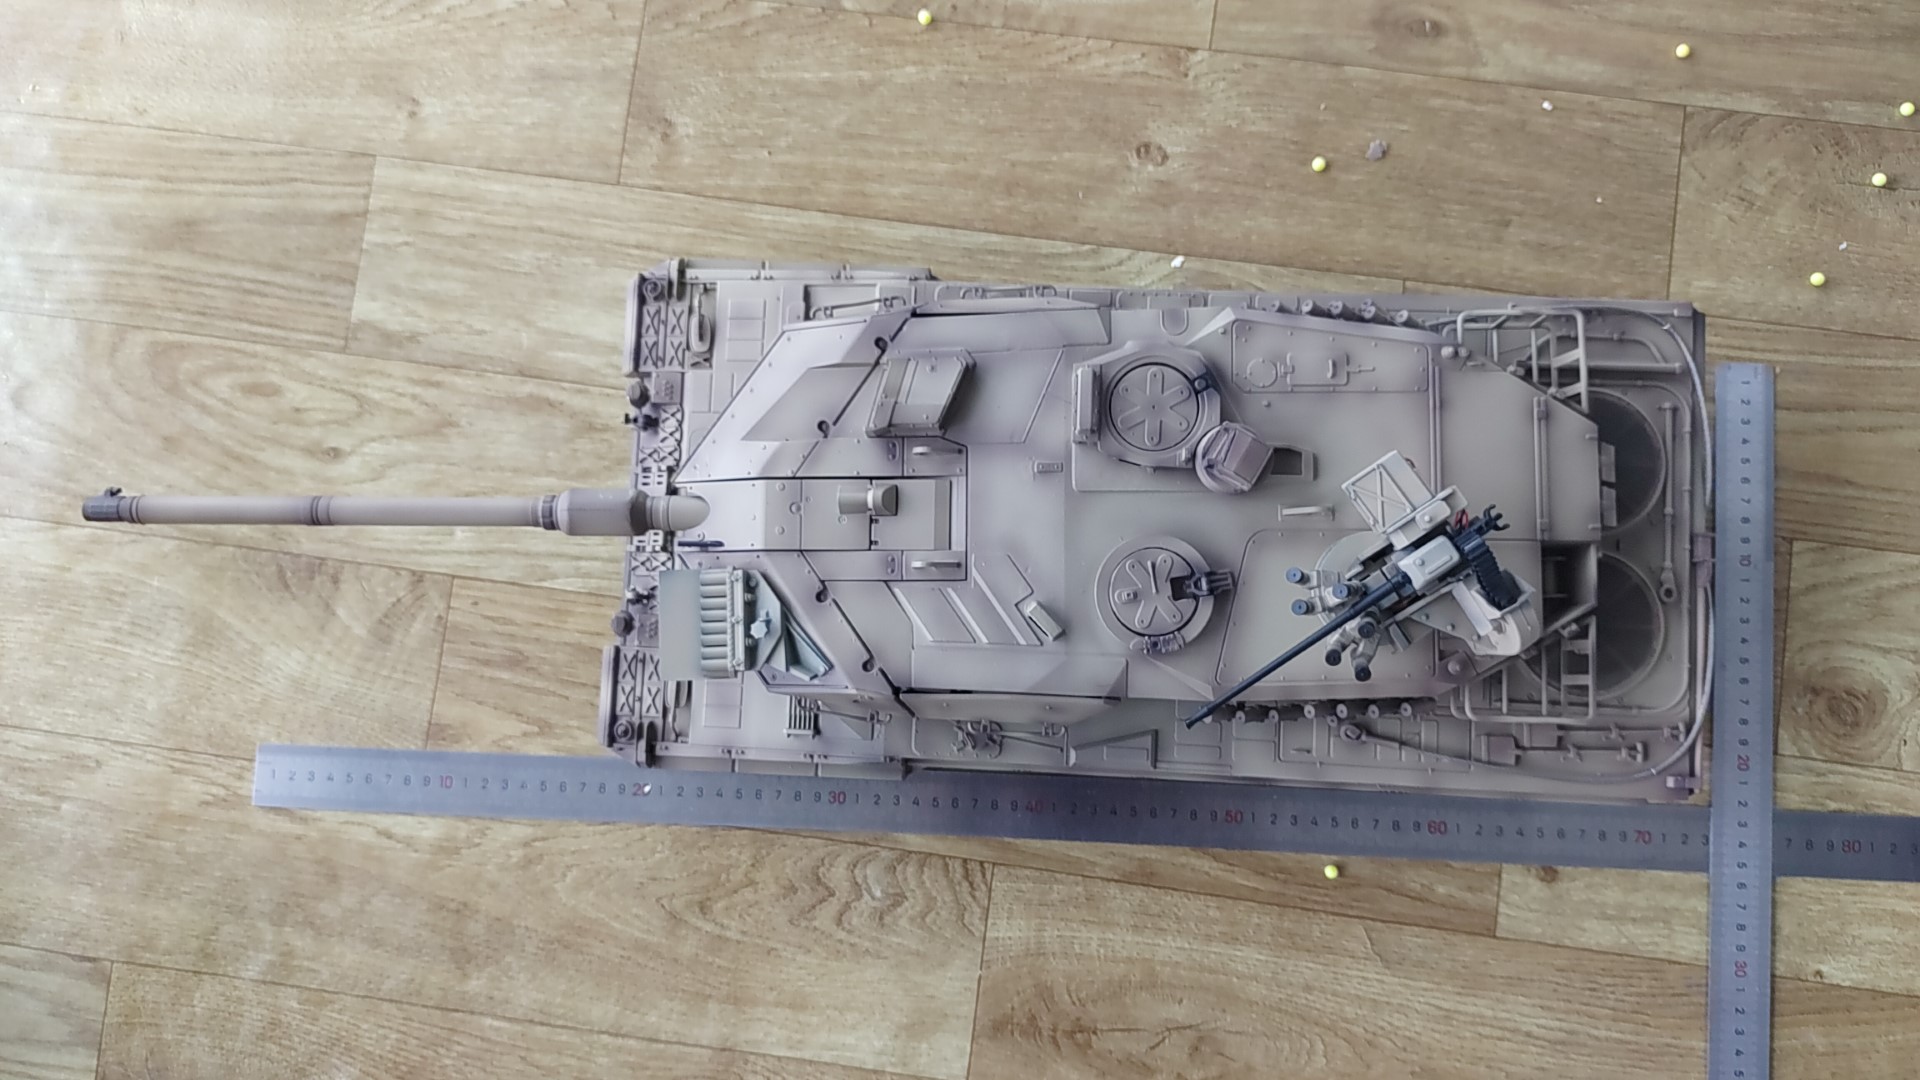 RC Leopard 2A6 Tank, Full Metal, Tank Gun Stabilizer, Remote controlled light weapon station 200PLUS (FLW 200PLUS) 19